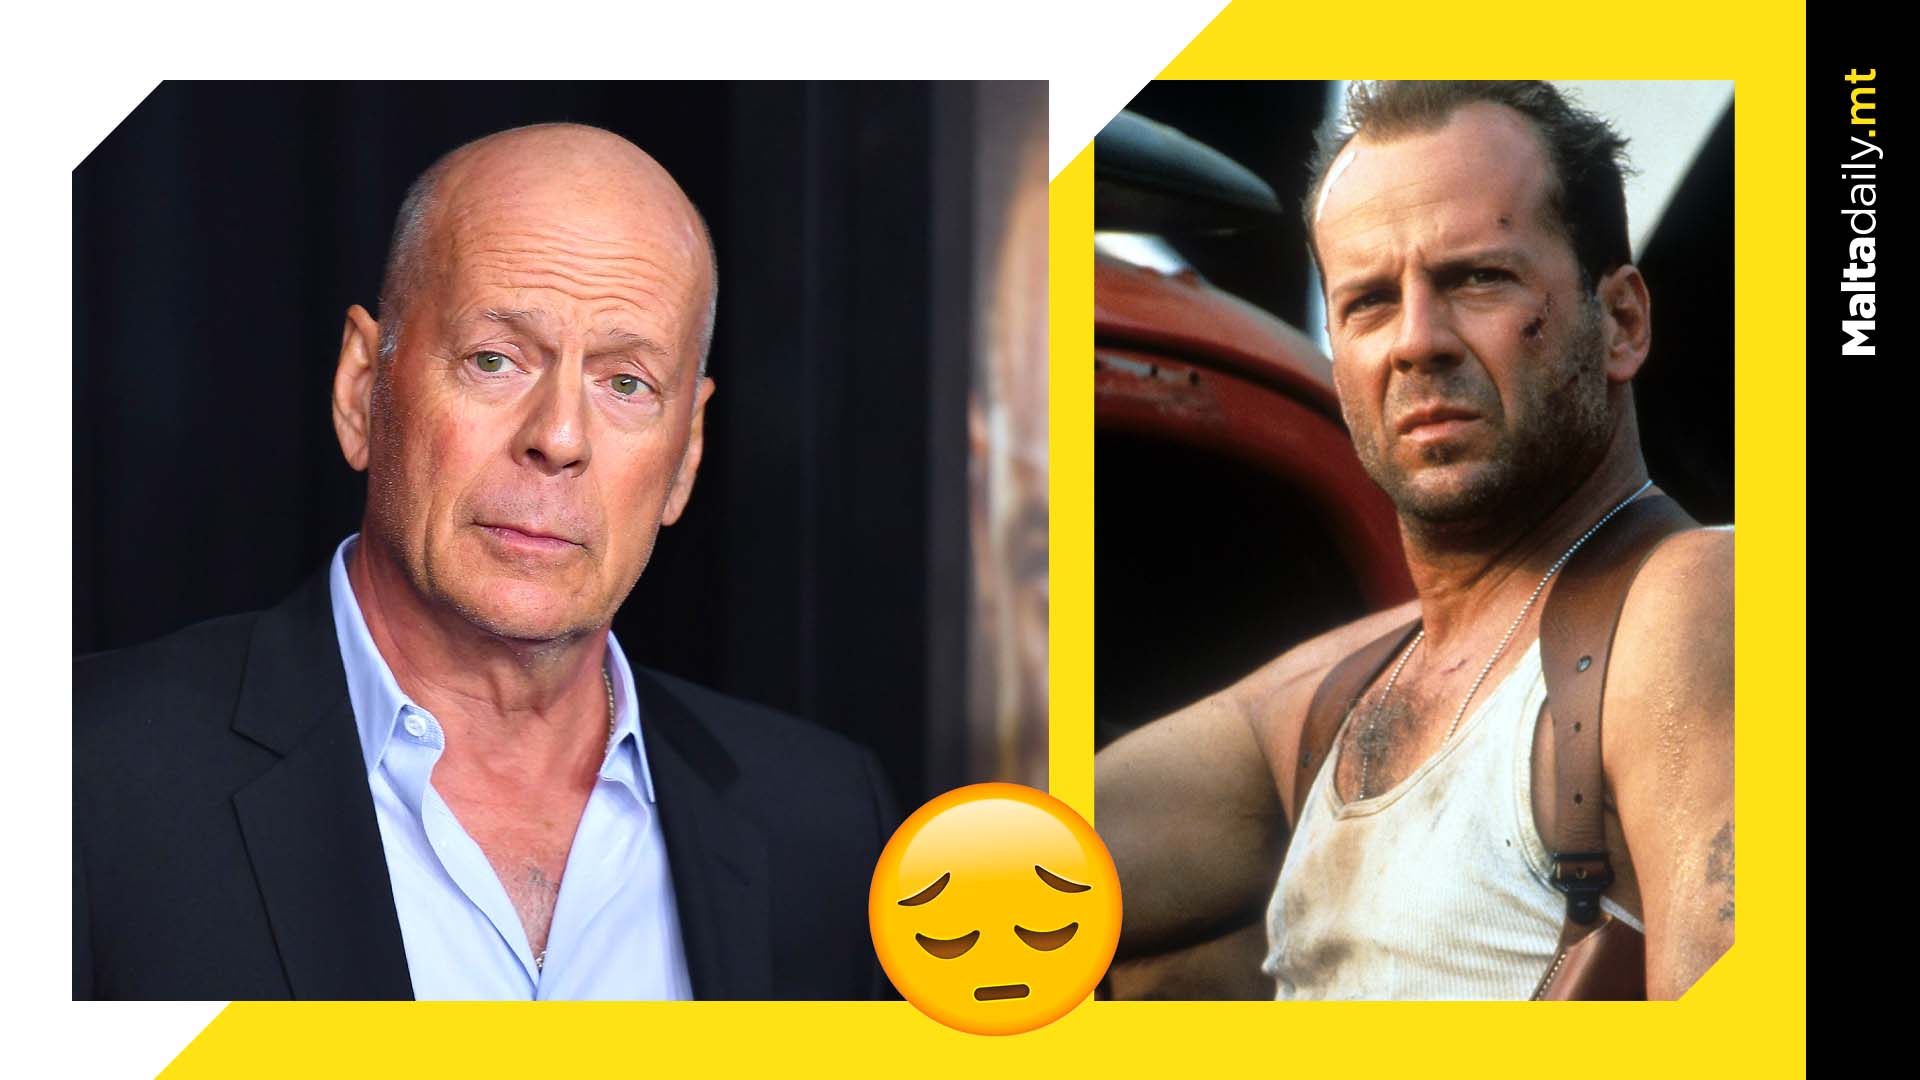 Actor Bruce Willis diagnosed with frontotemporal dementia